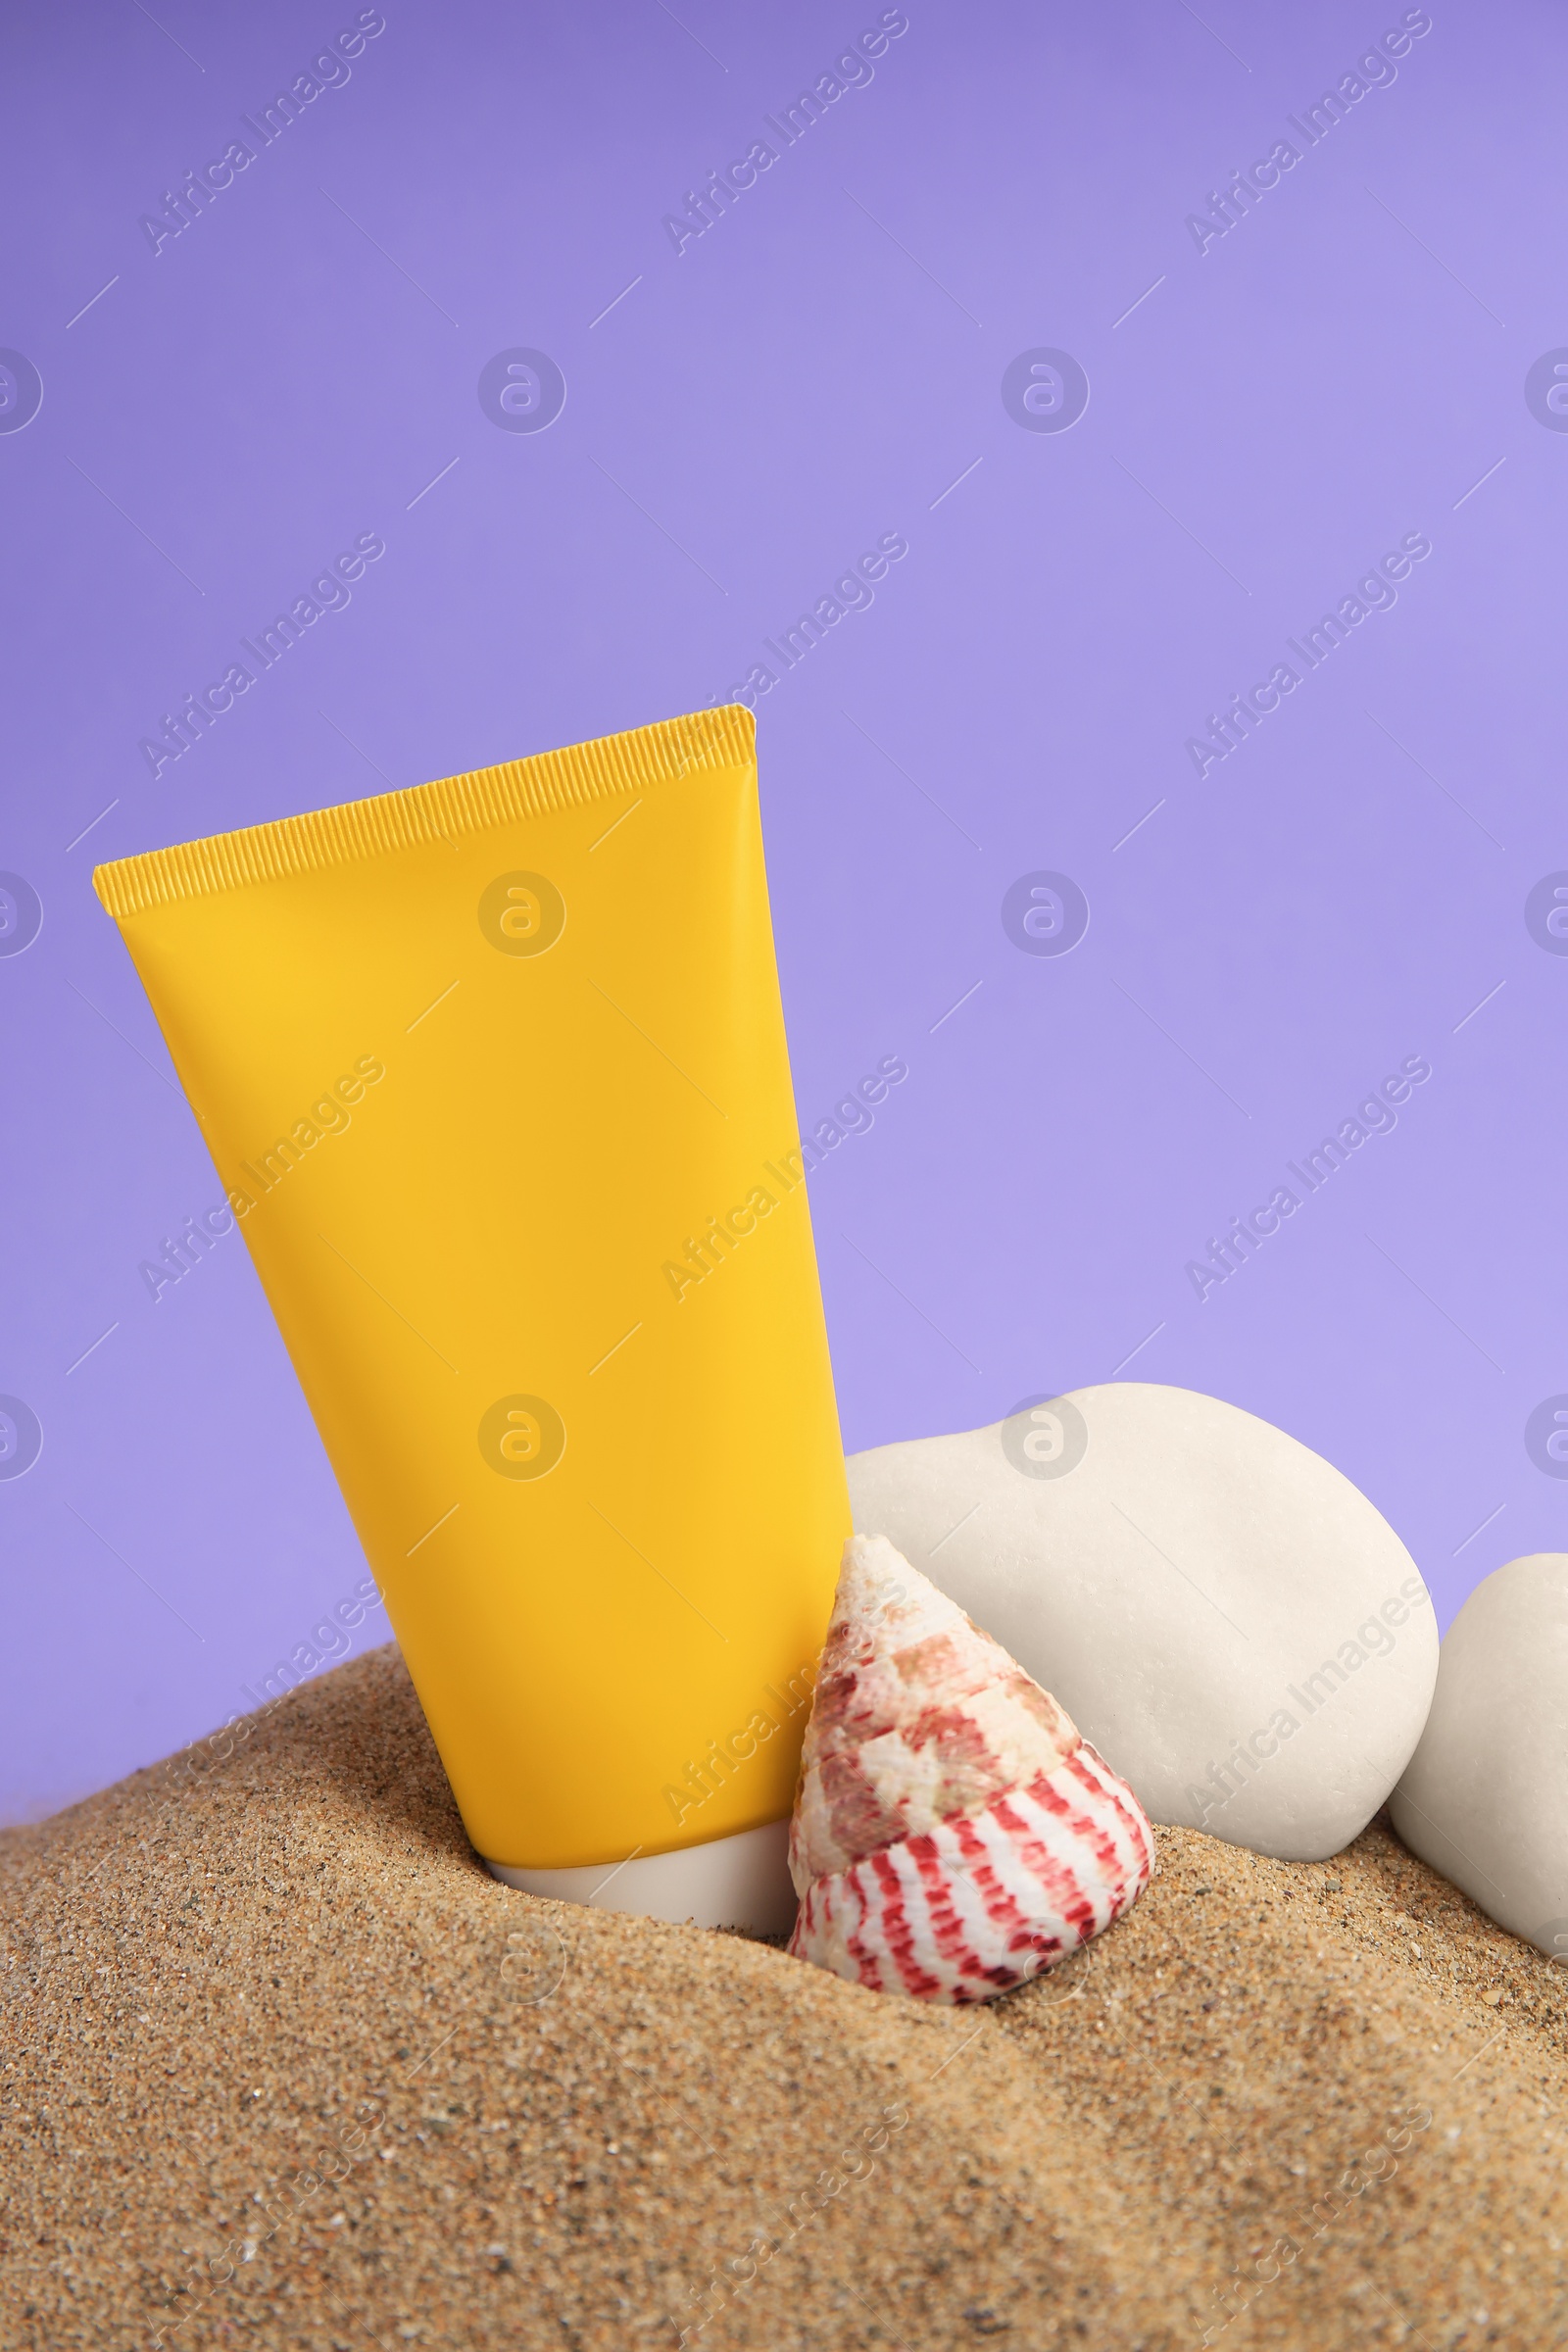 Photo of Sand with sunscreen, stones and seashell against lilac background, space for text. Sun protection care